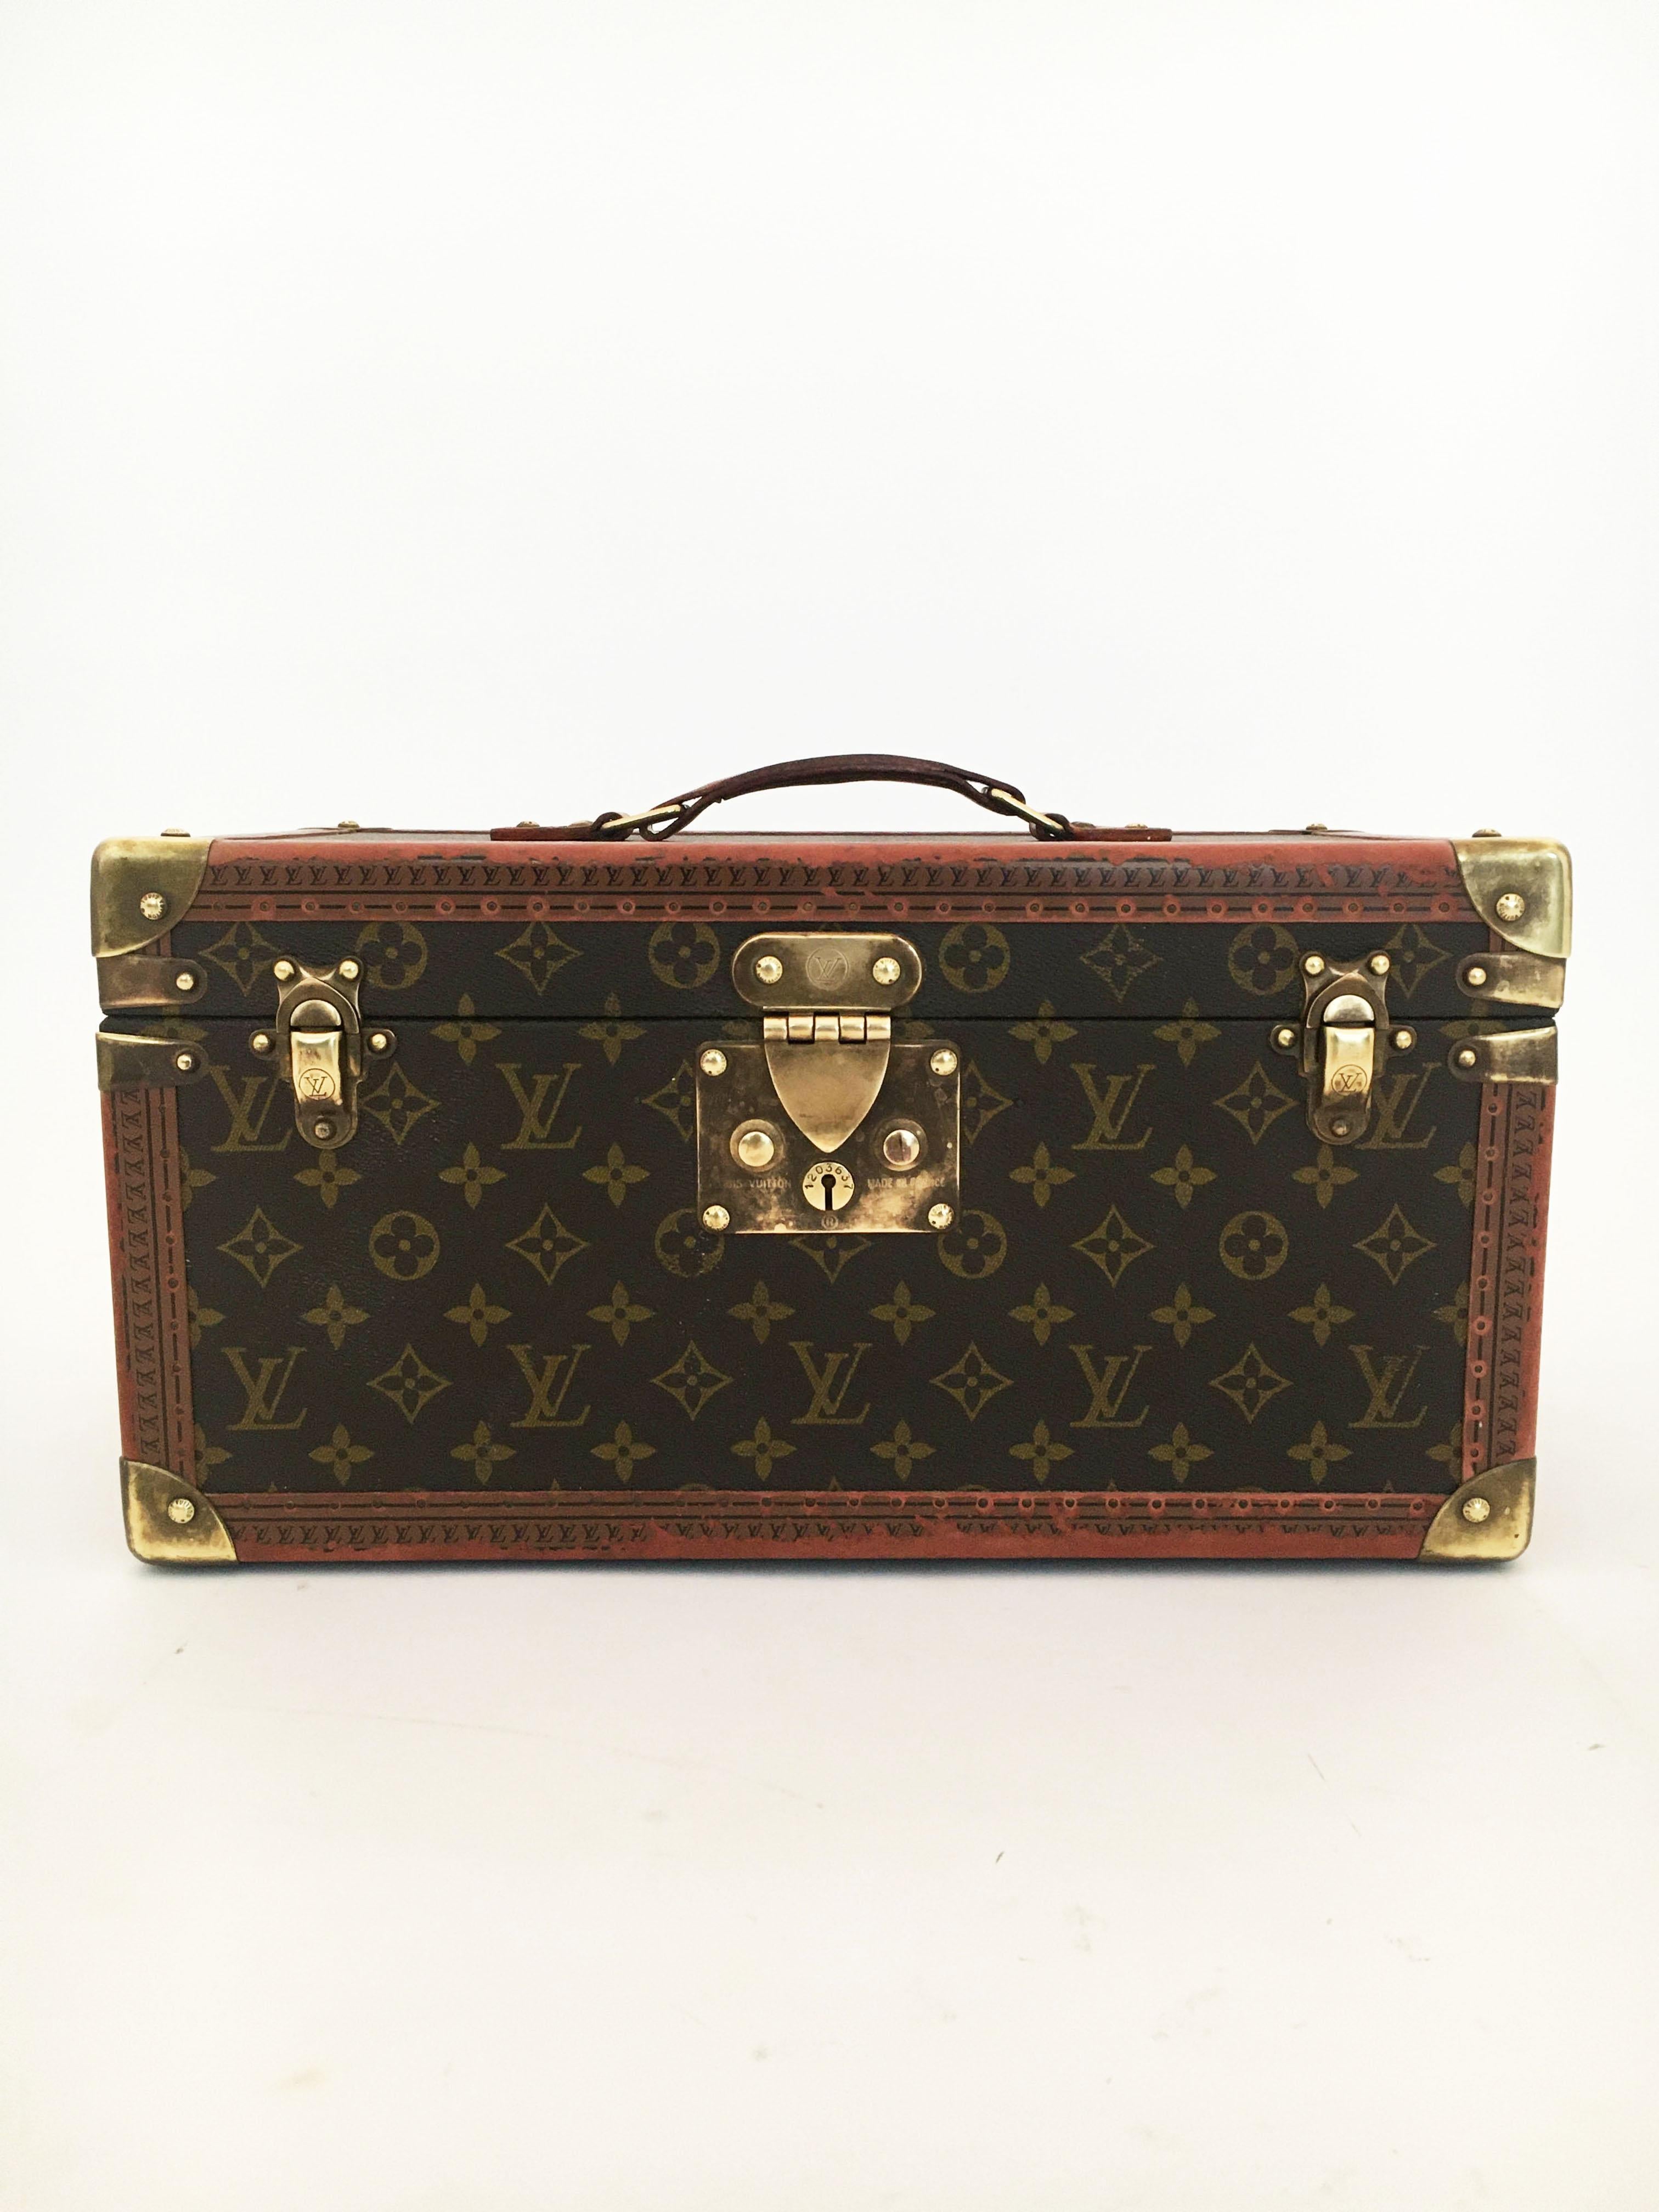 Original Boite Bouteilles or train case from Louis Vuitton, likely made in the 1990s. Made from their monogram canvas and trimmed in LV stamped coated leather, this piece is the current version of Louis Vuitton's Boite Bouteilles Et Glace/case with